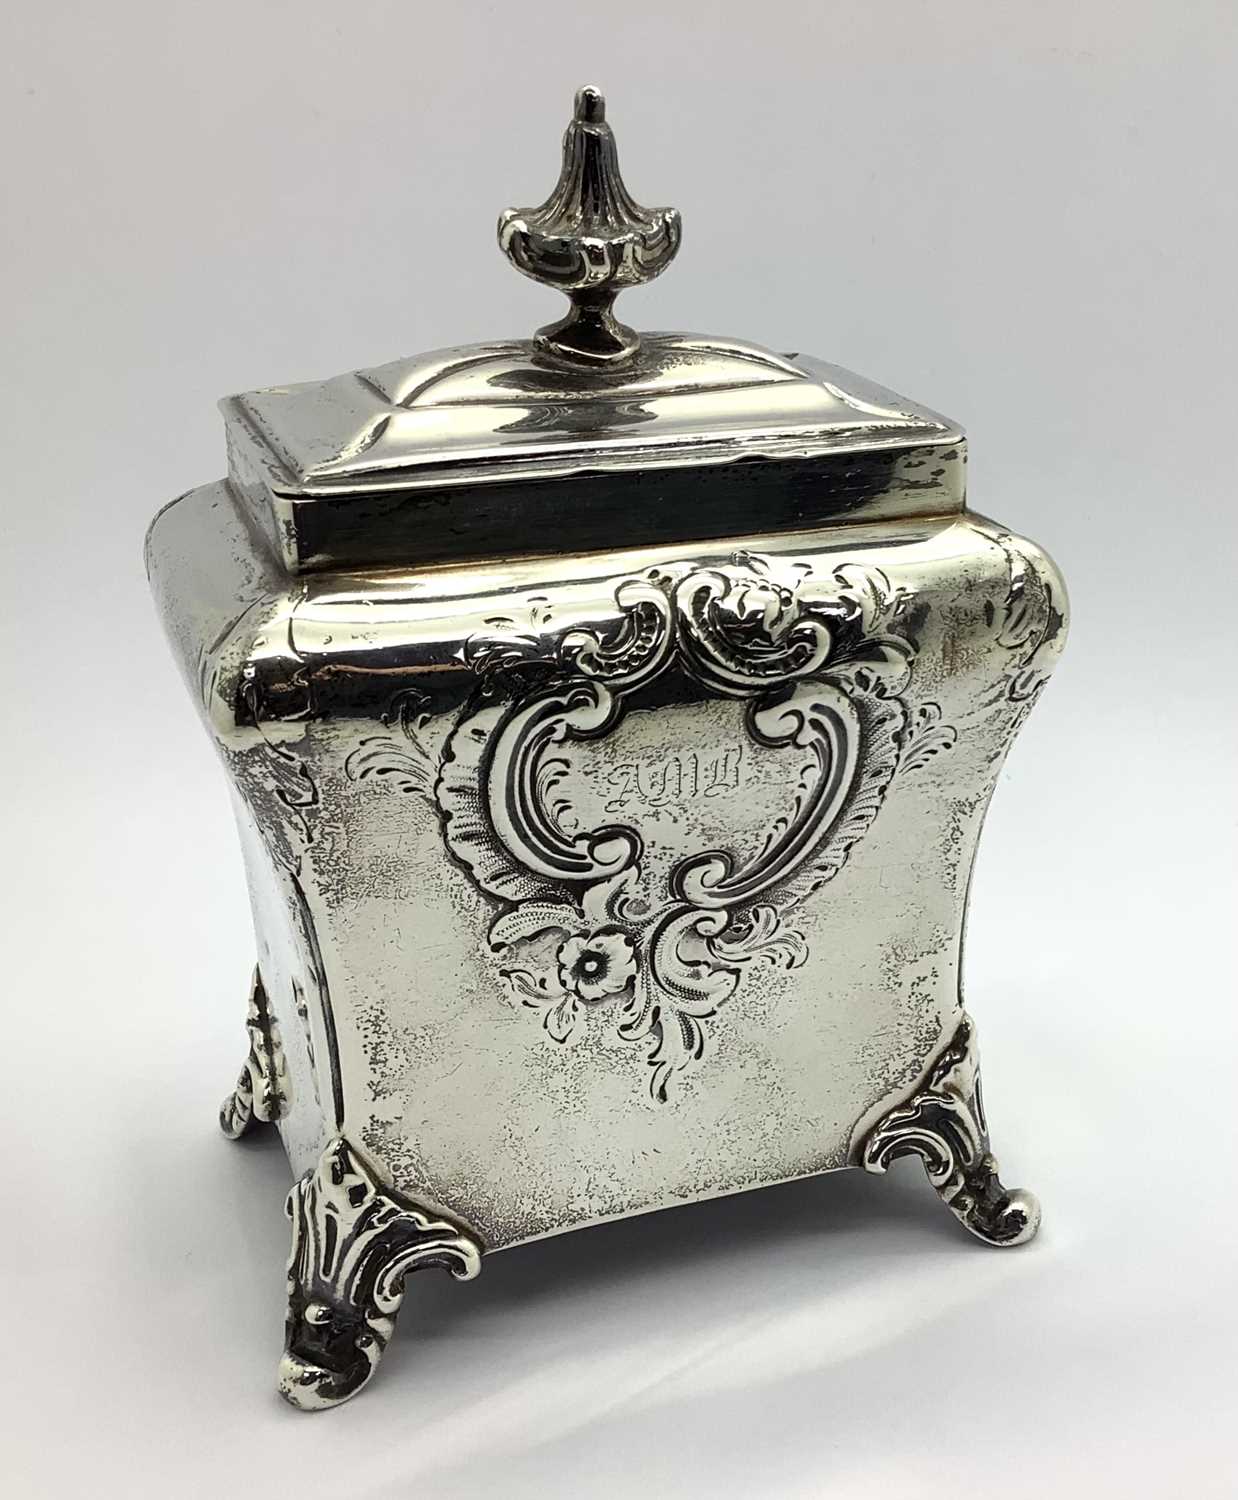 A Decorative Victorian Hallmarked Silver Caddy, GR, London 1848, of rectangular inverted baluster